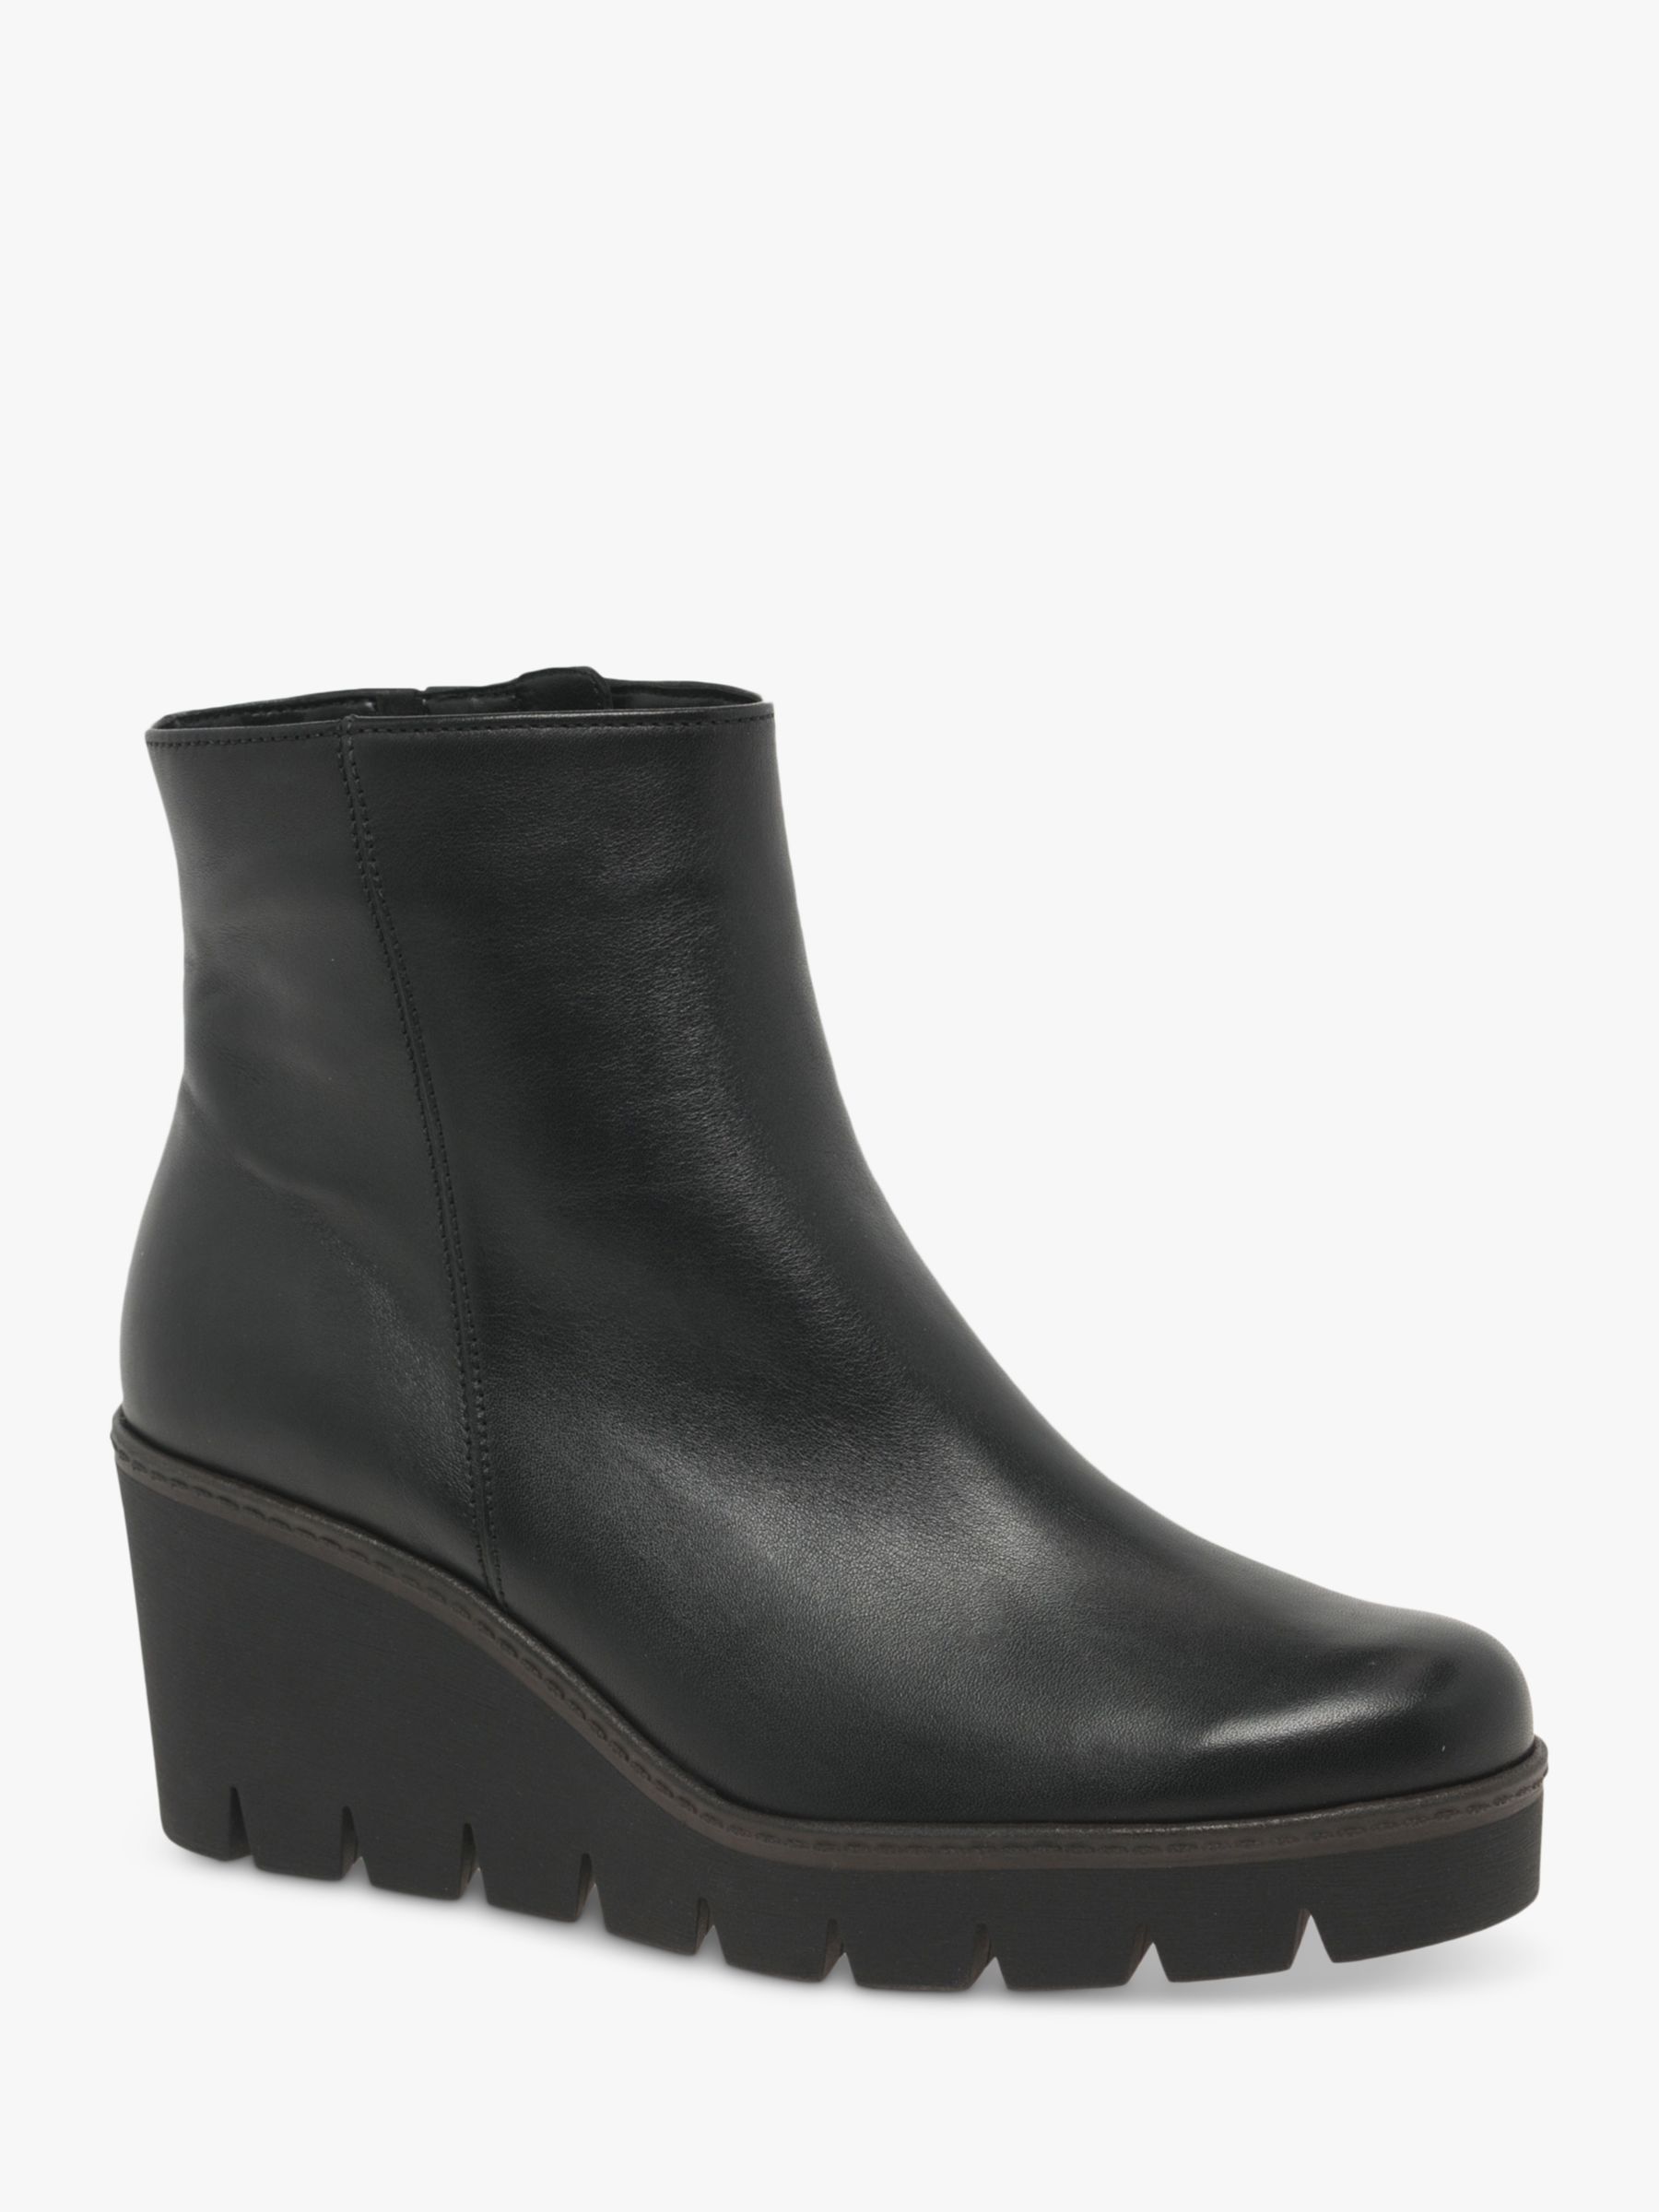 Gabor Utopia Leather Wedge Heeled Ankle Boots, Black at John Lewis ...